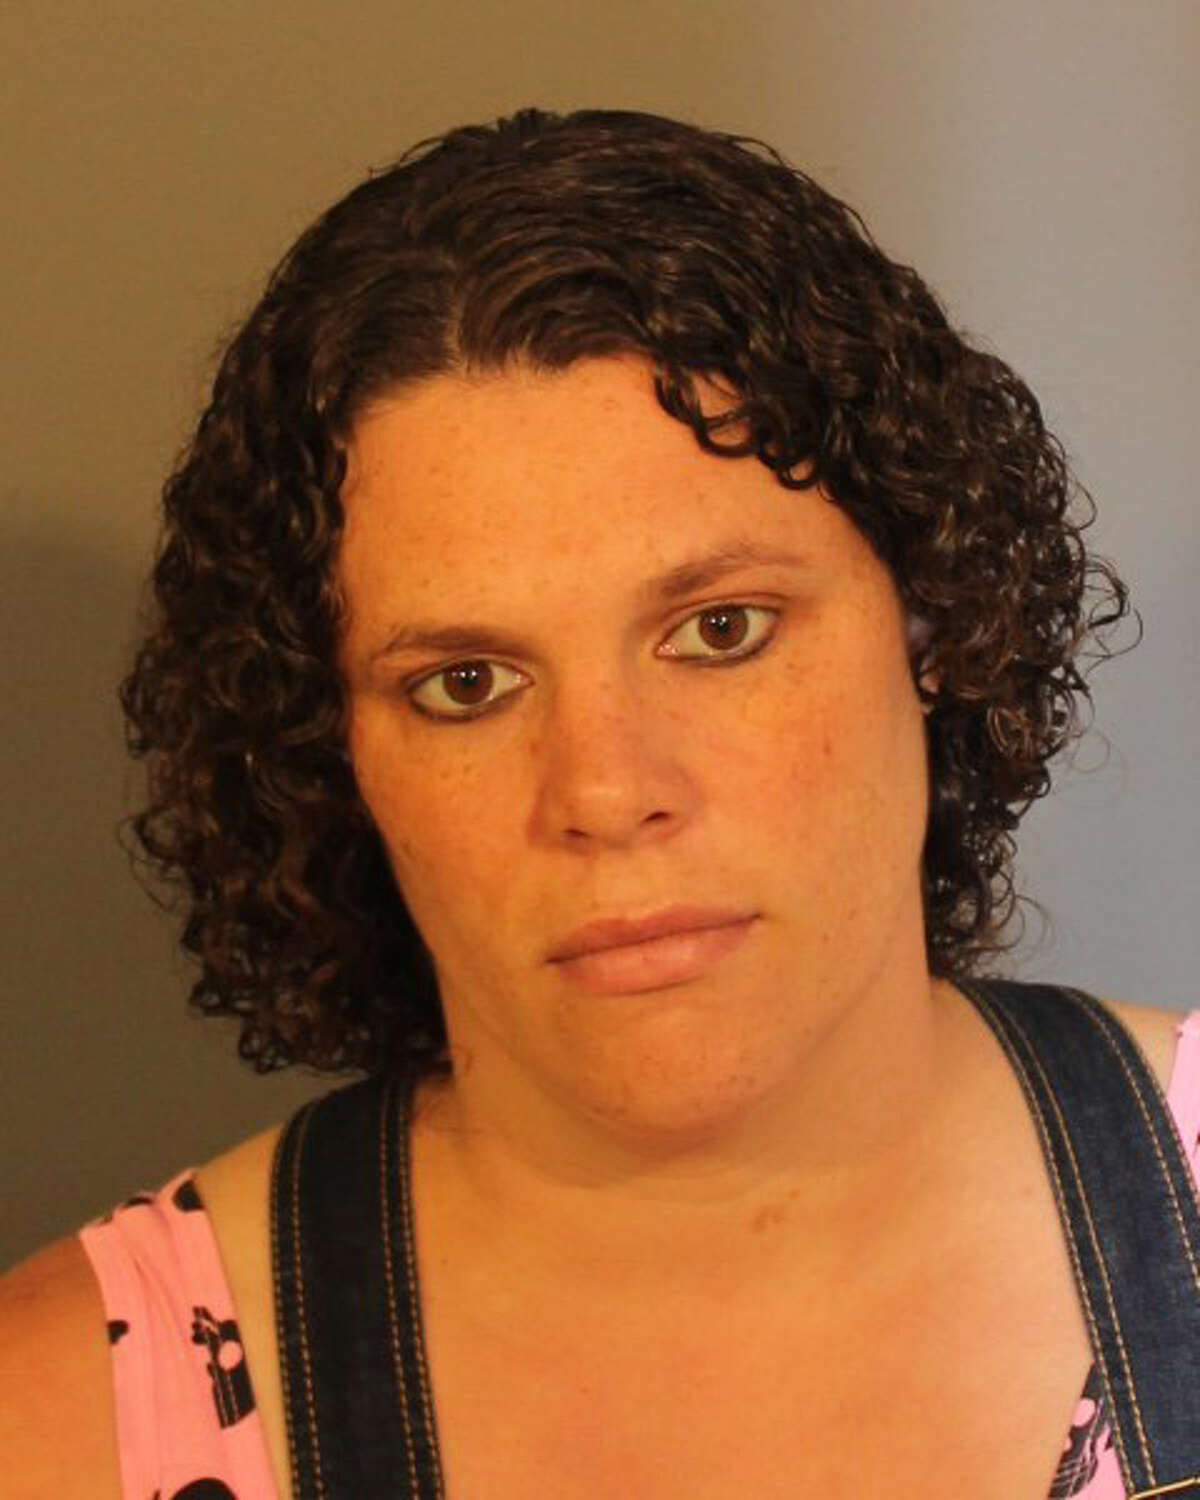 Kathy Seton, 29, of Cold Spring, N.Y., was charged Wednesday with animal cruelty.